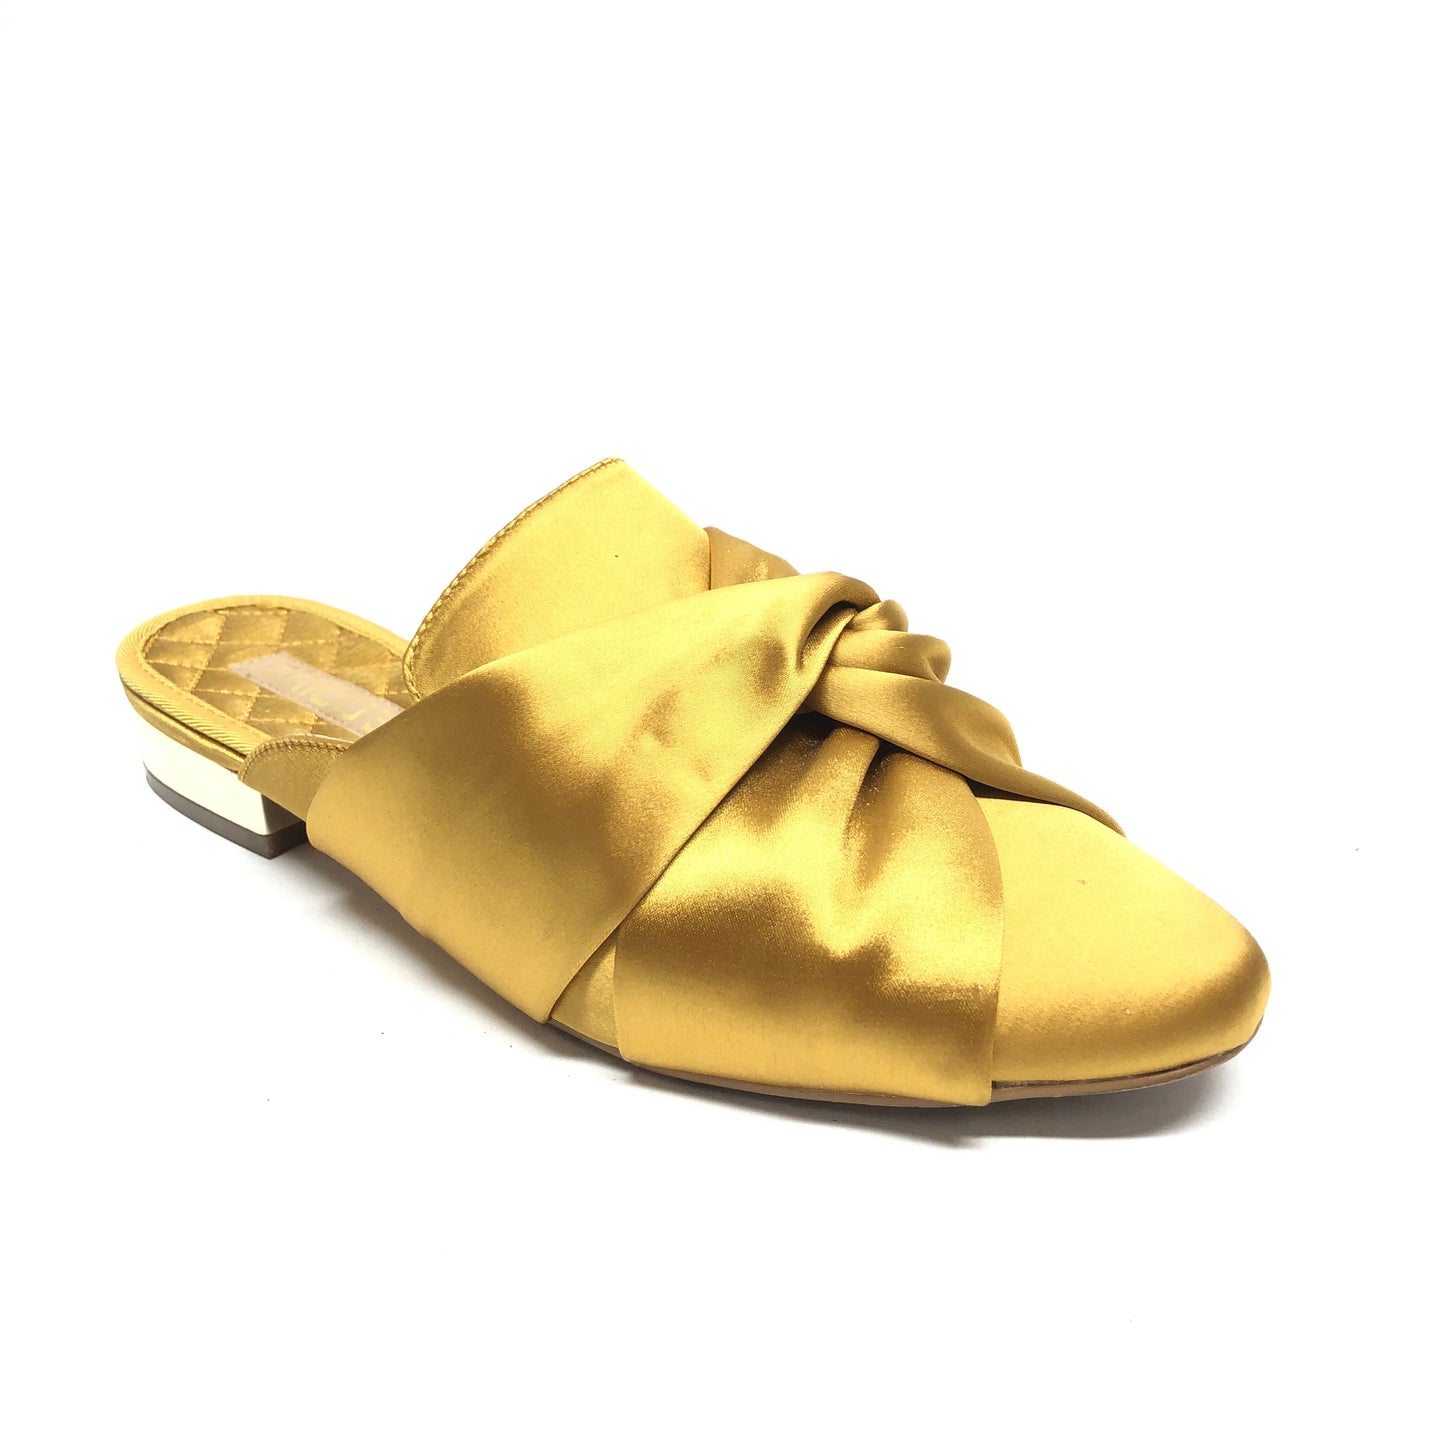 Yellow Shoes Flats Chicos, Size 7.5